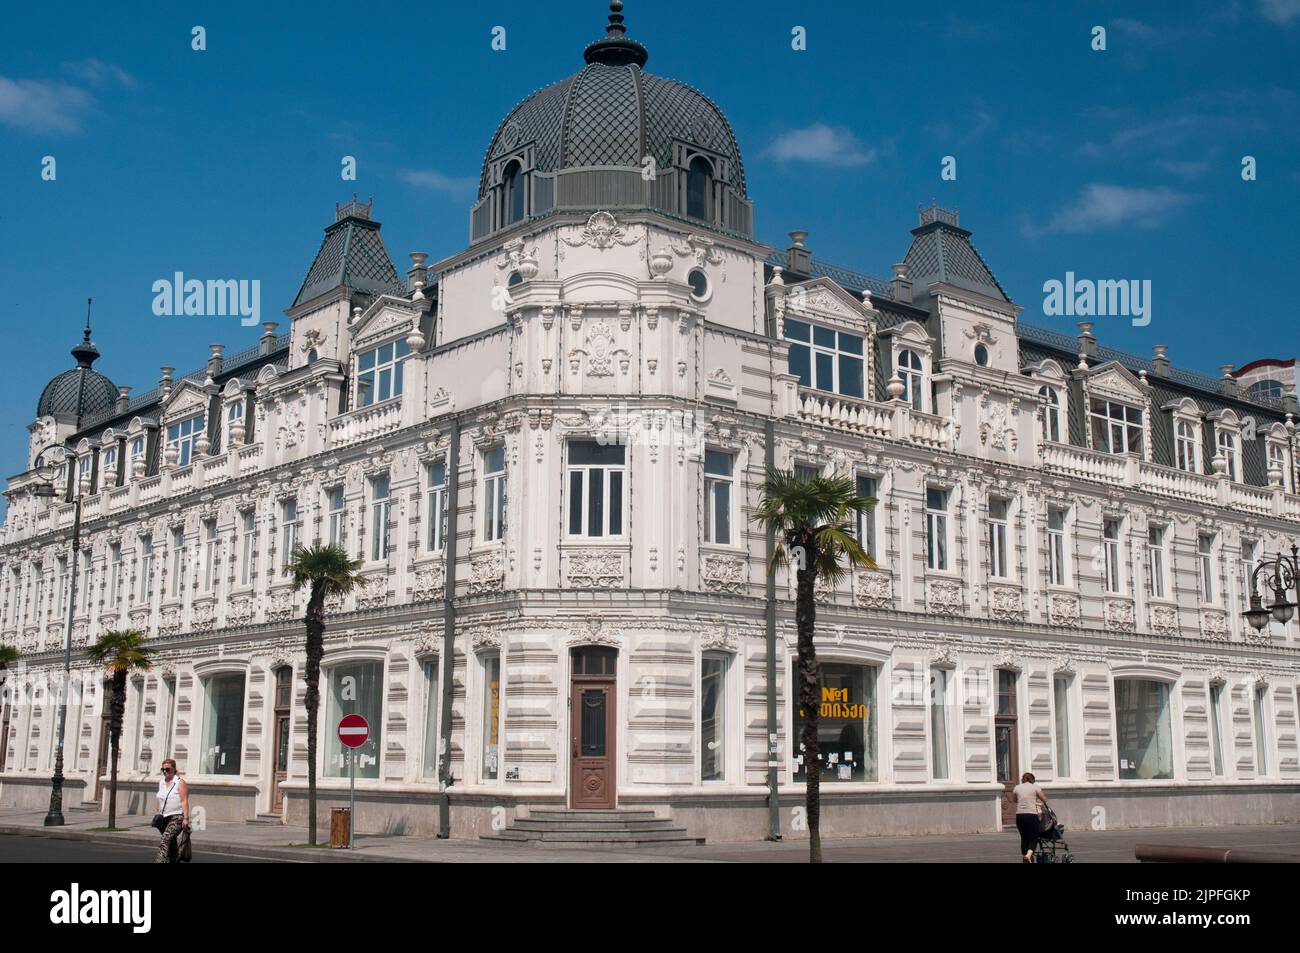 A grand Belle Epoque commercial building in Batumi, a port city on the Black Sea in modern-day Georgia Stock Photo